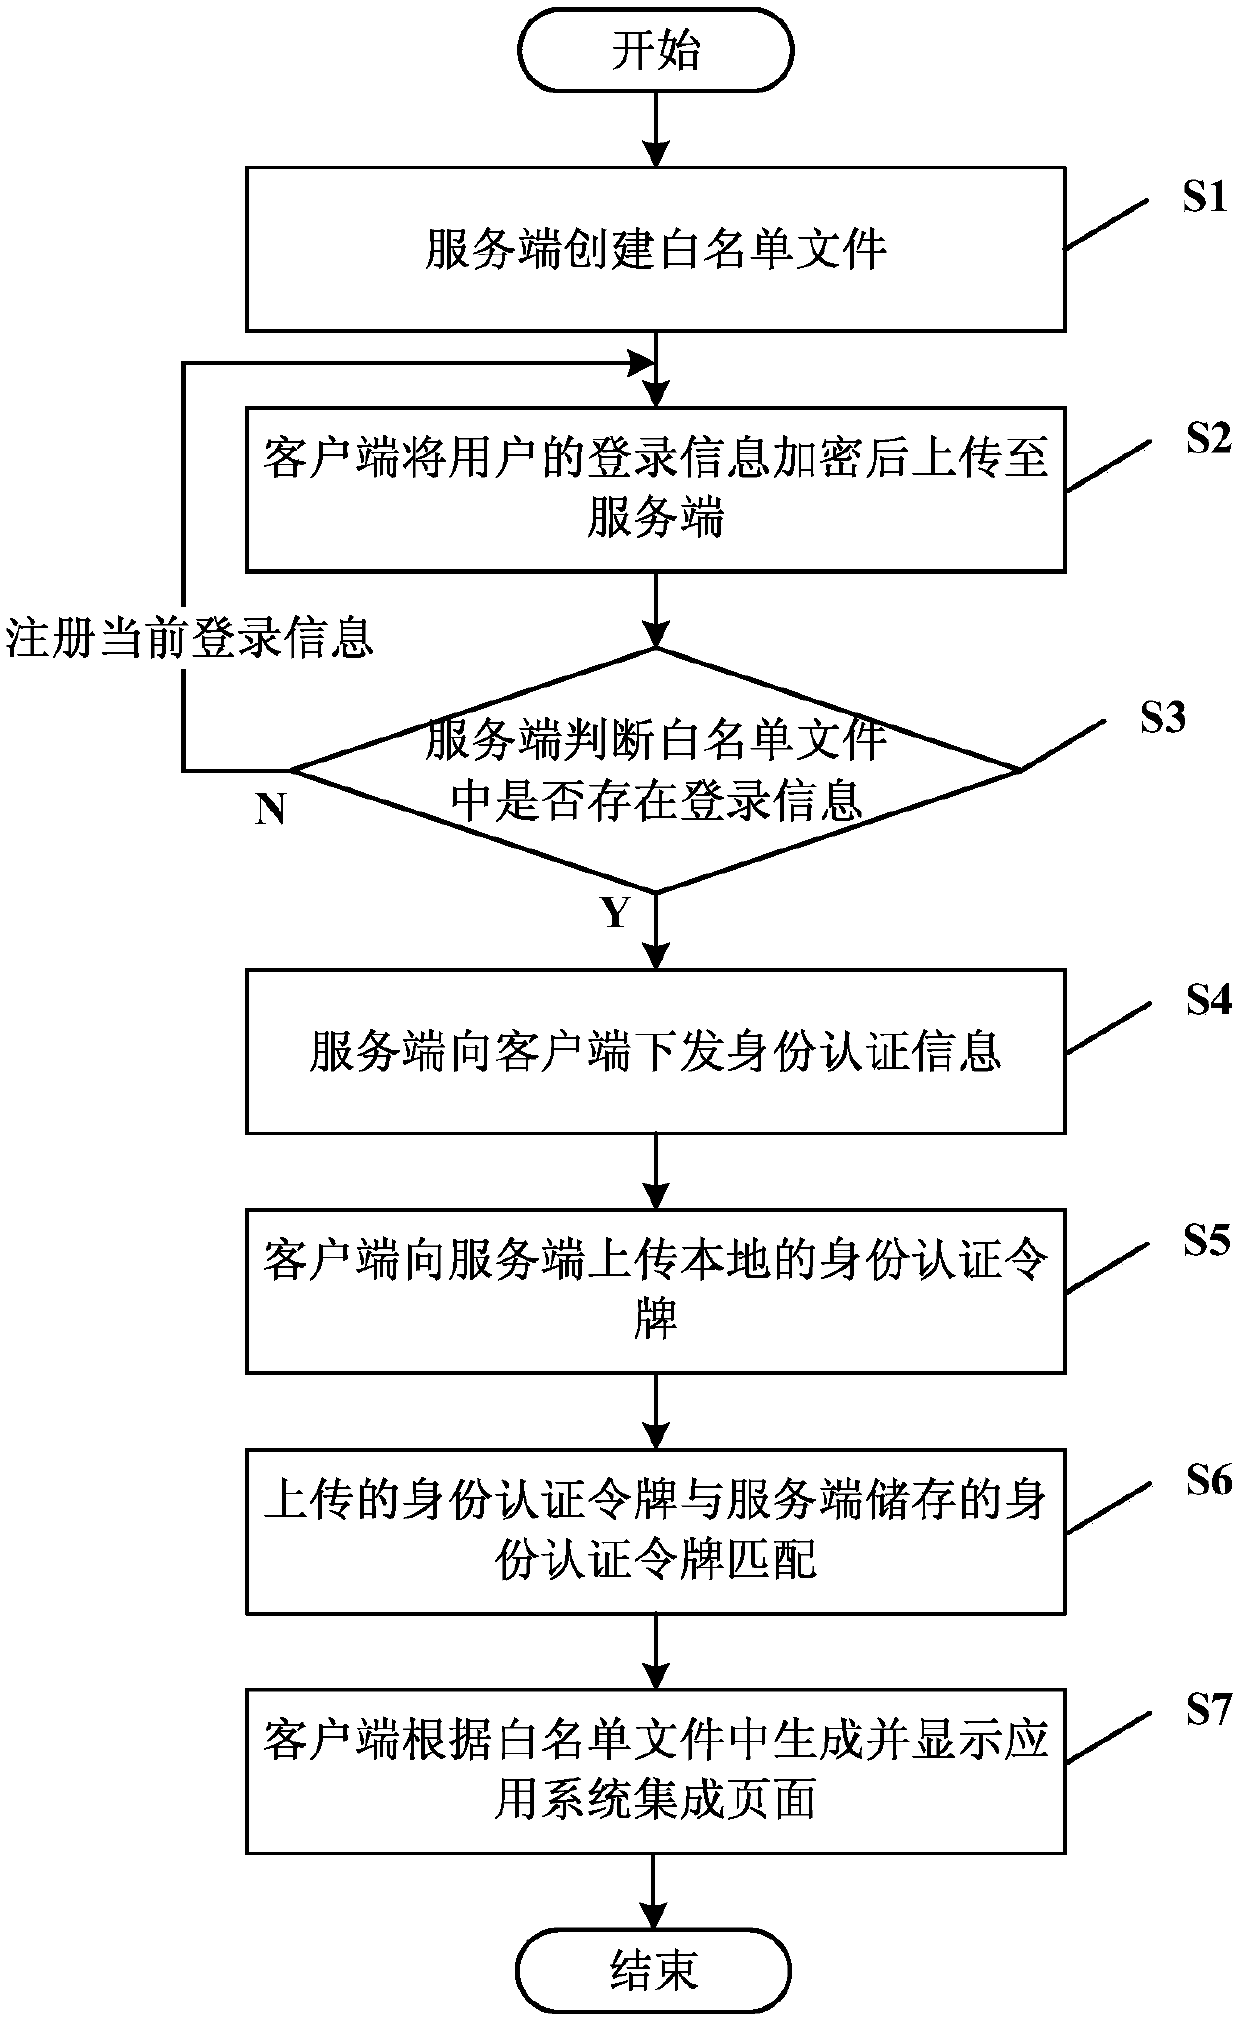 Single-point login identity authentication method and system based on client